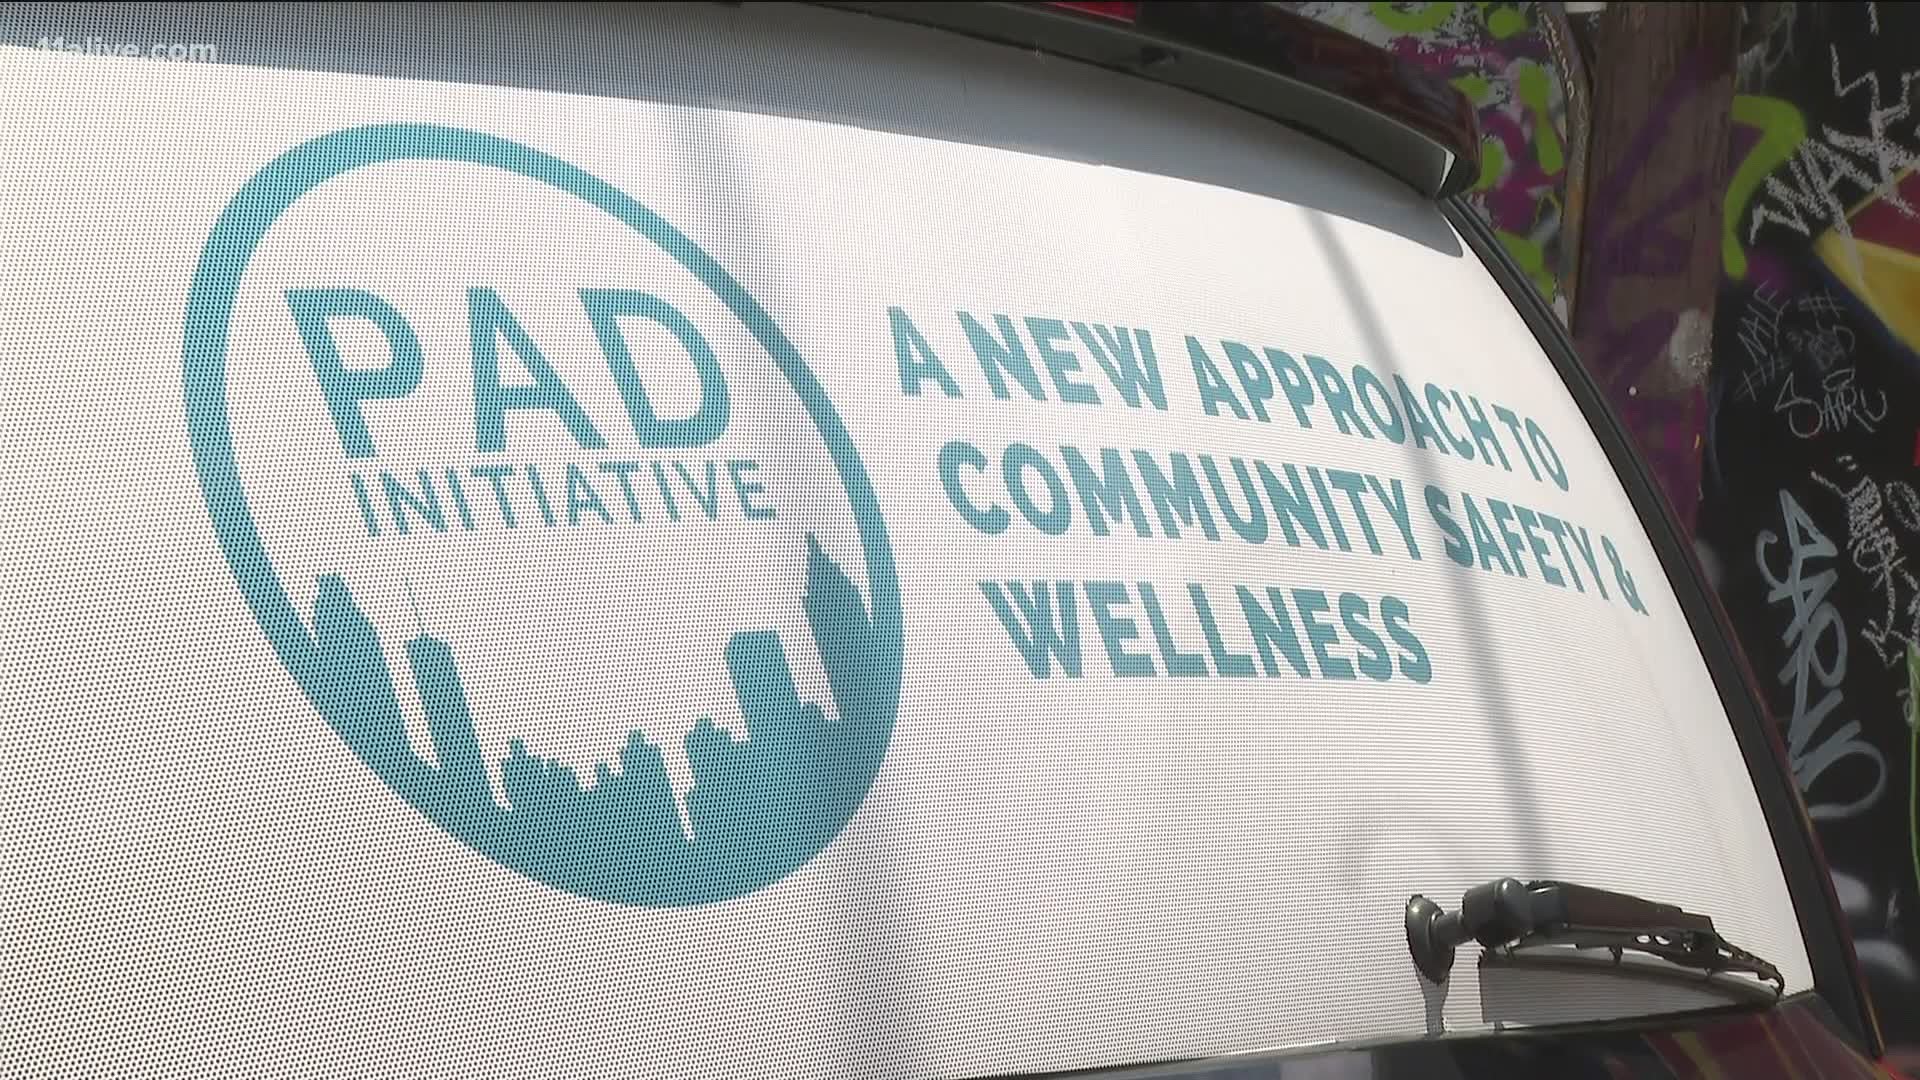 The PAD program targets drugs addicts, the homeless and those struggling with mental health issues.